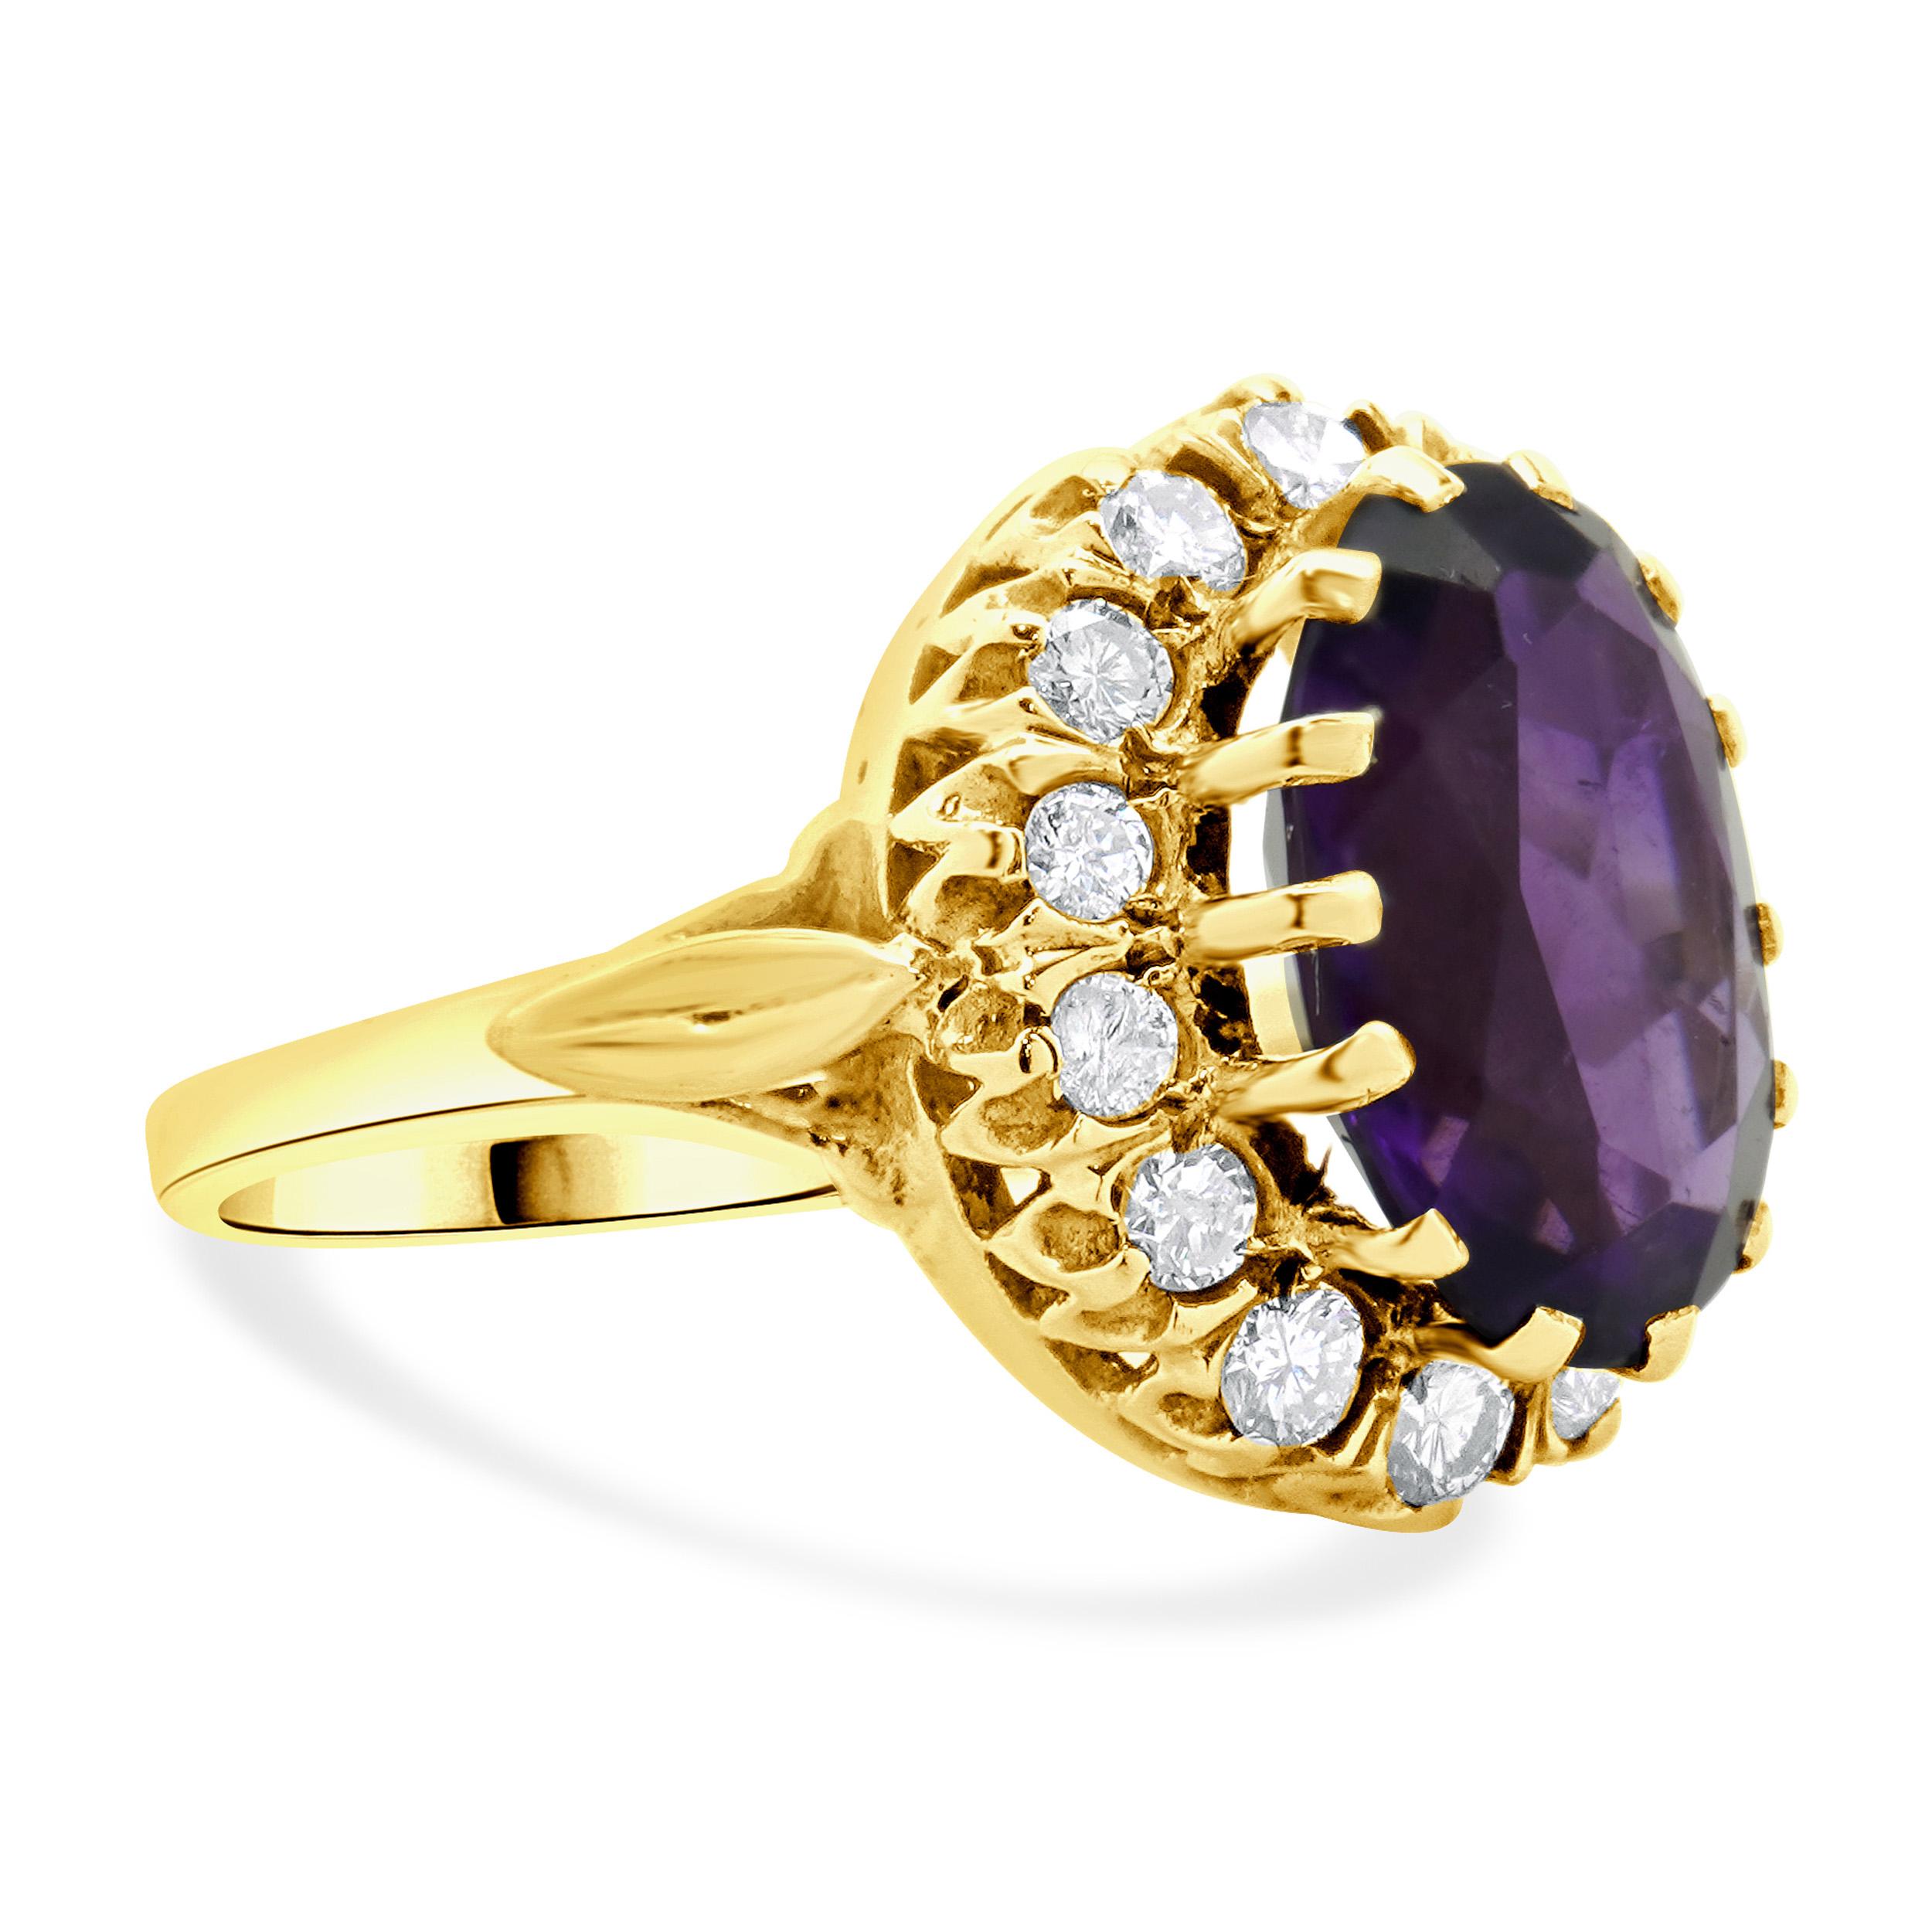 10 Karat Yellow Gold Oval Amethyst and Diamond Cocktail Ring In Excellent Condition For Sale In Scottsdale, AZ